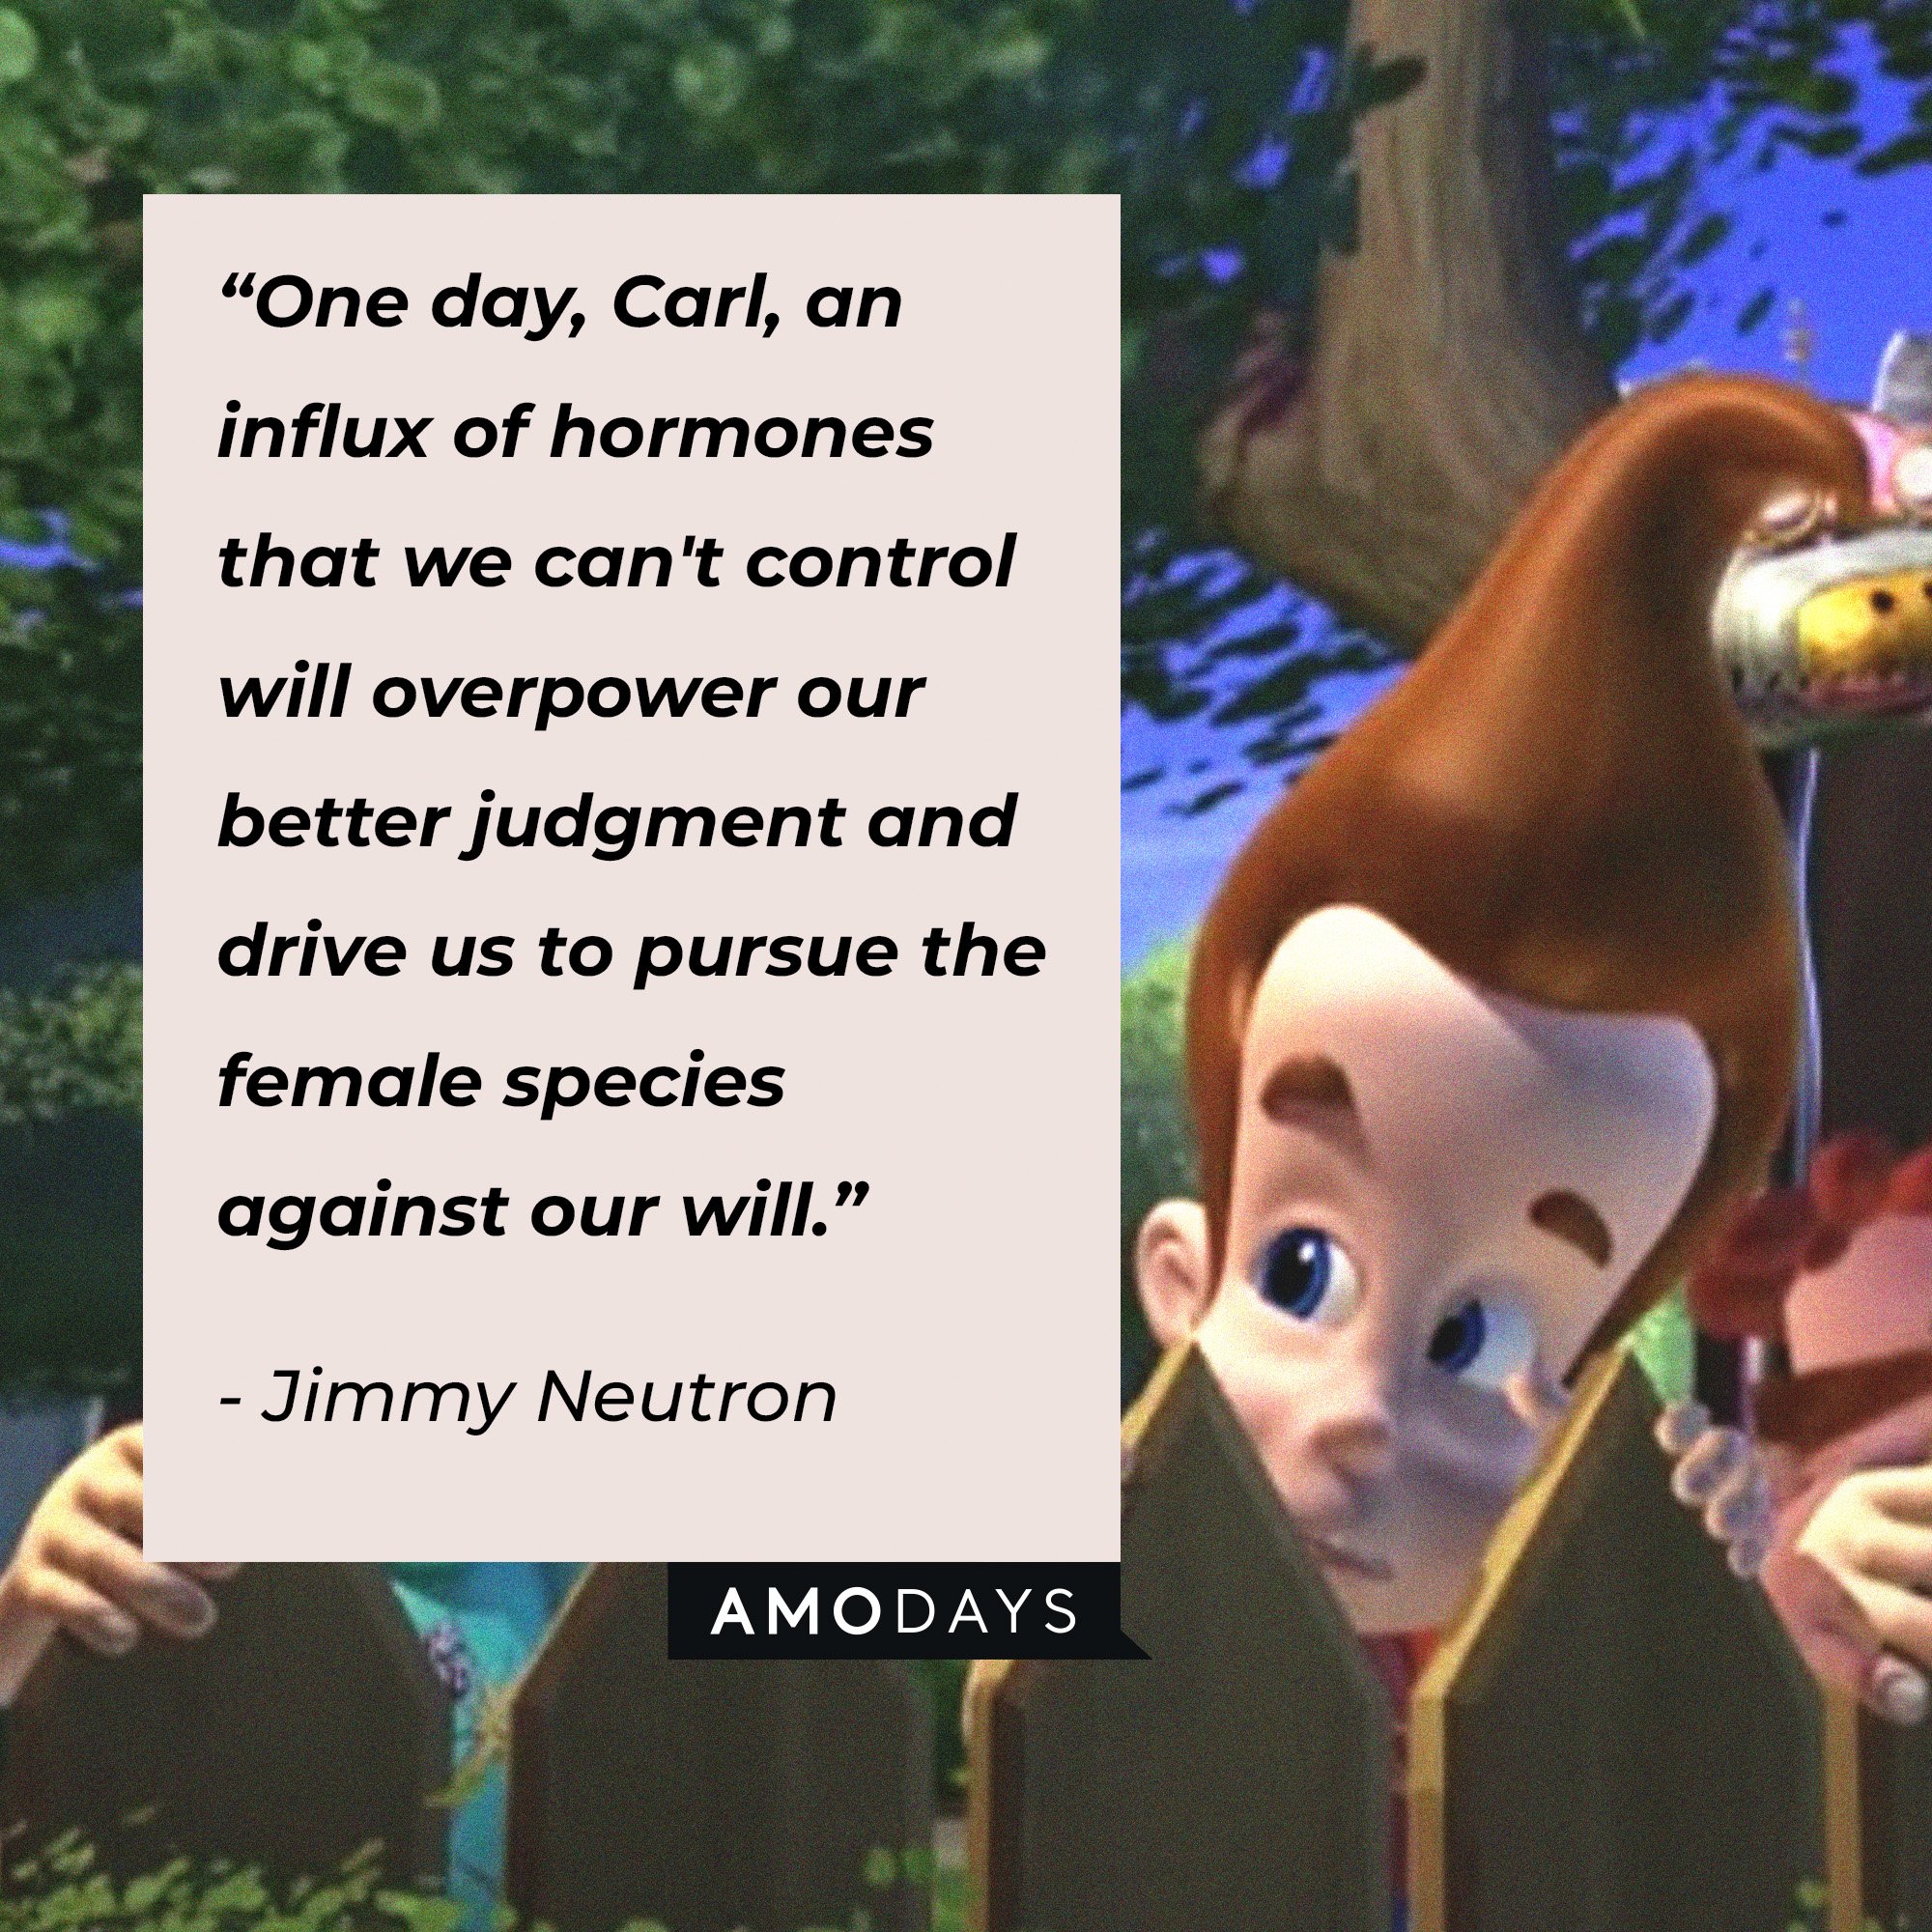 Jimmy Neutron’s quote: “One day, Carl, an influx of hormones that we can't control will overpower our better judgment and drive us to pursue the female species against our will.” | Image: AmoDays